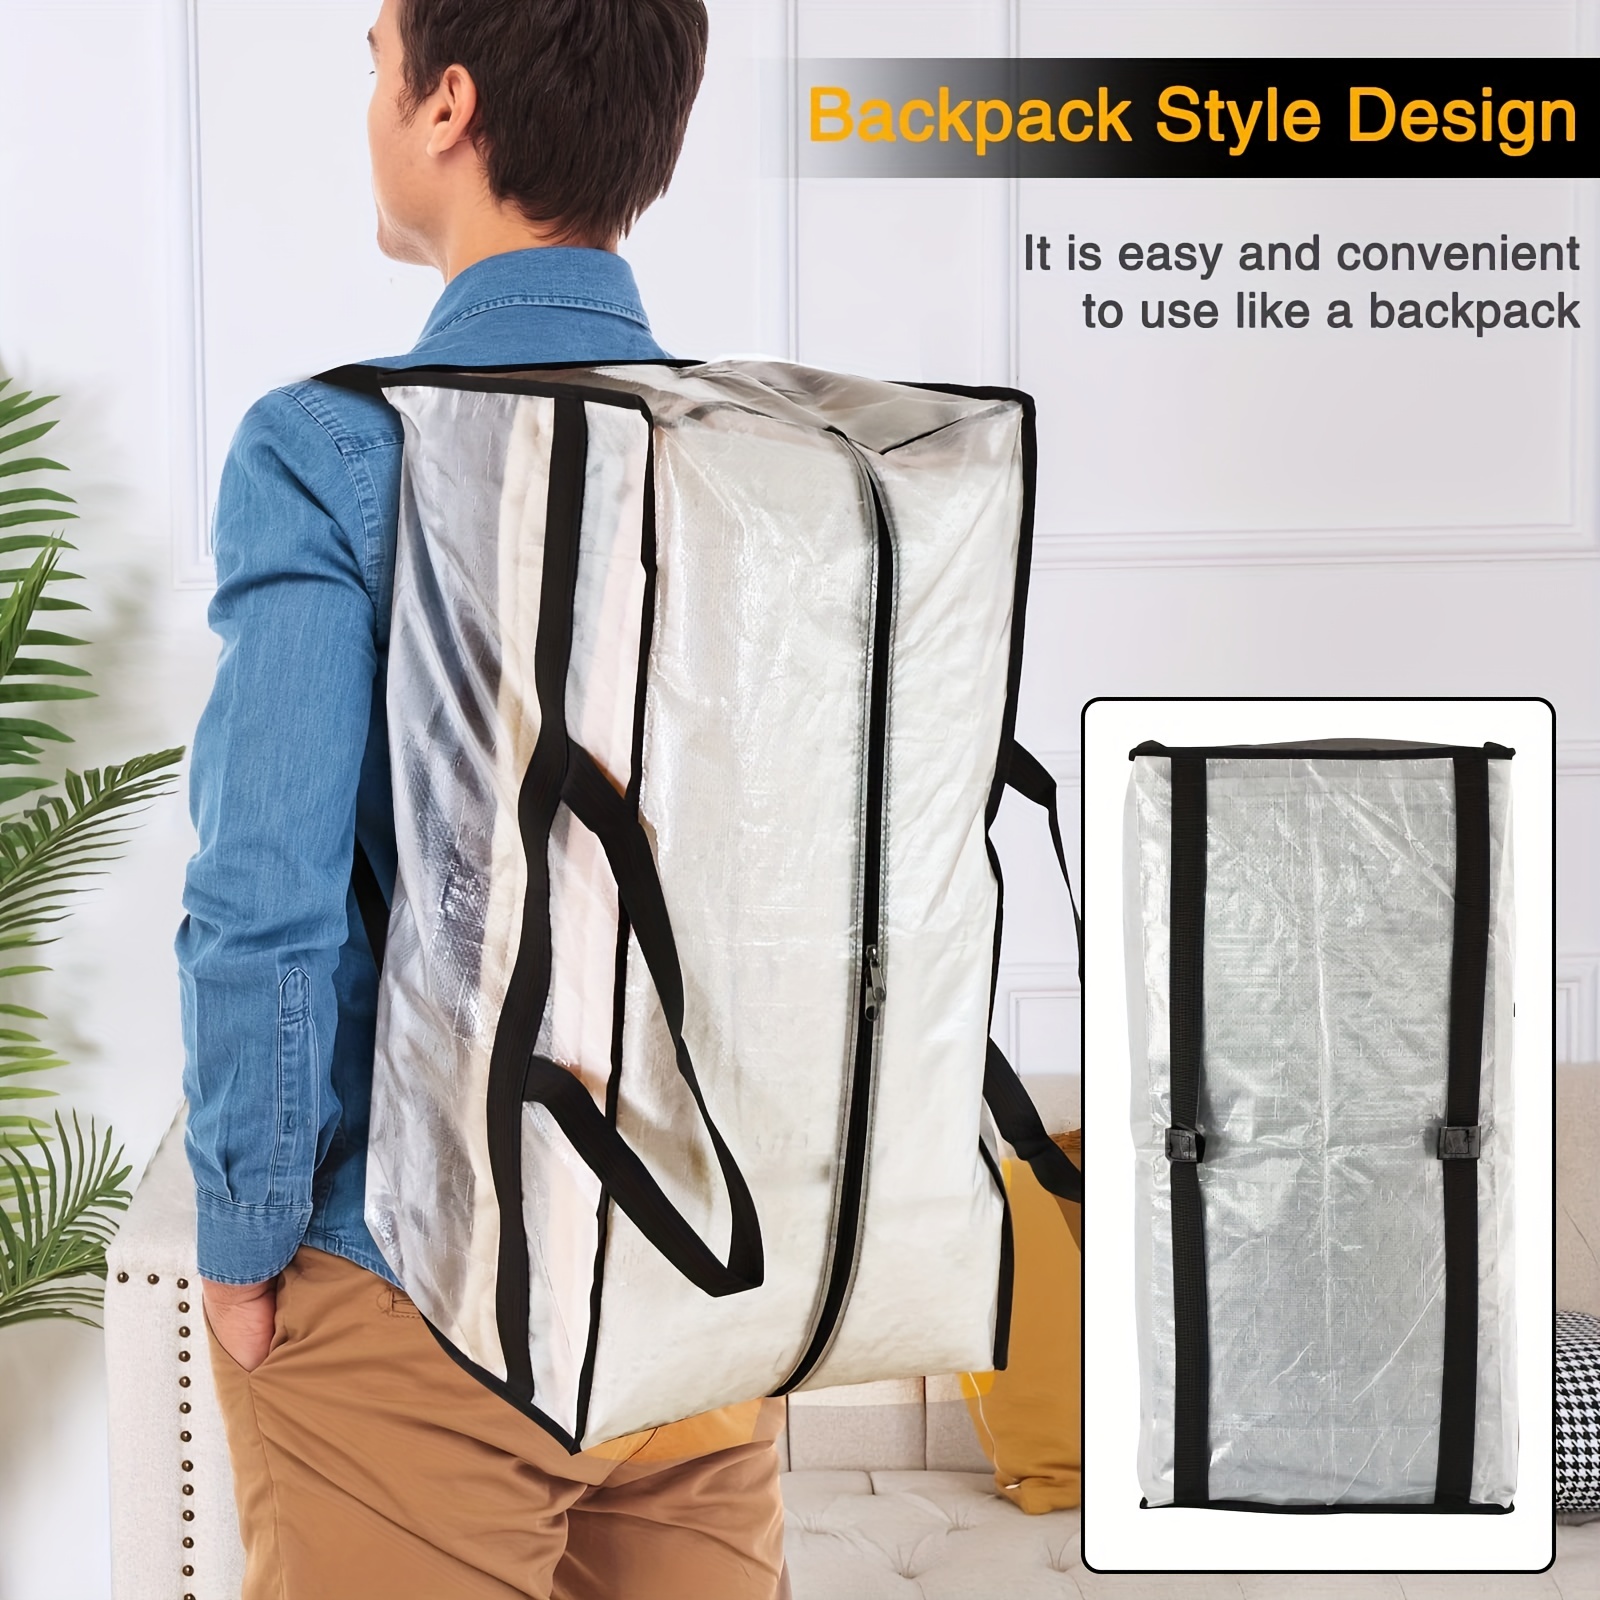 Over-Sized Clear Storage Bag with Strong Handles and Zippers